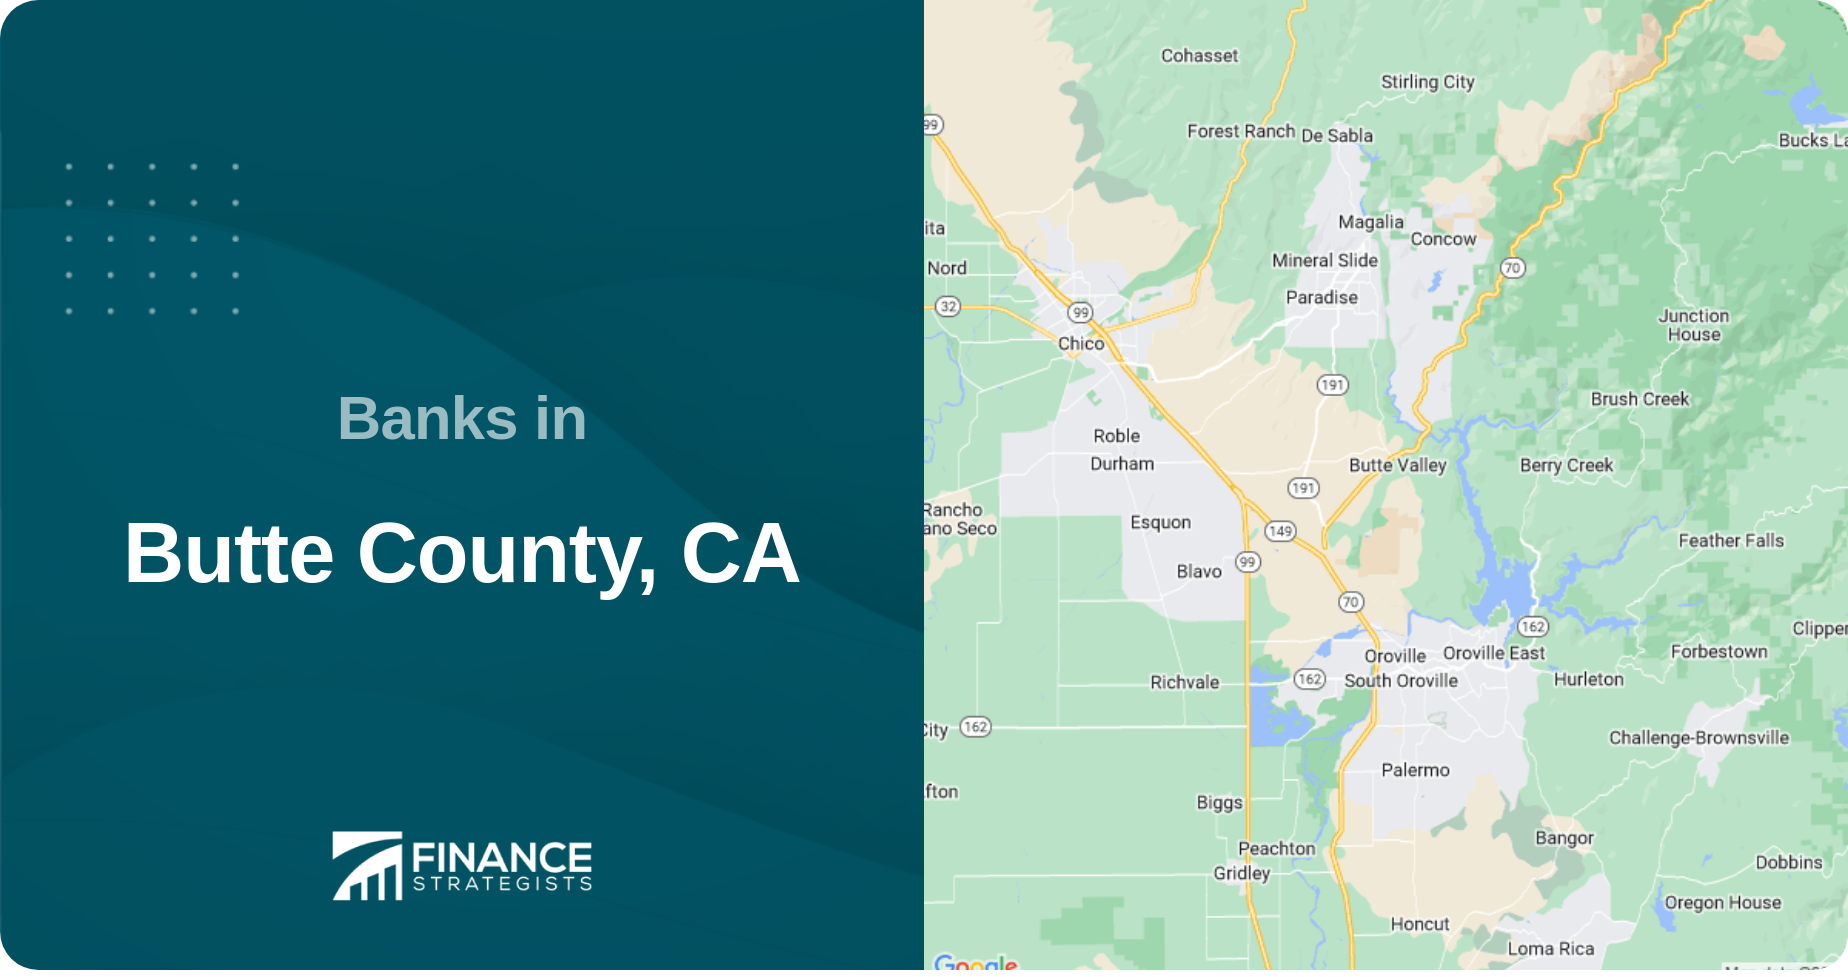 Banks in Butte County, CA